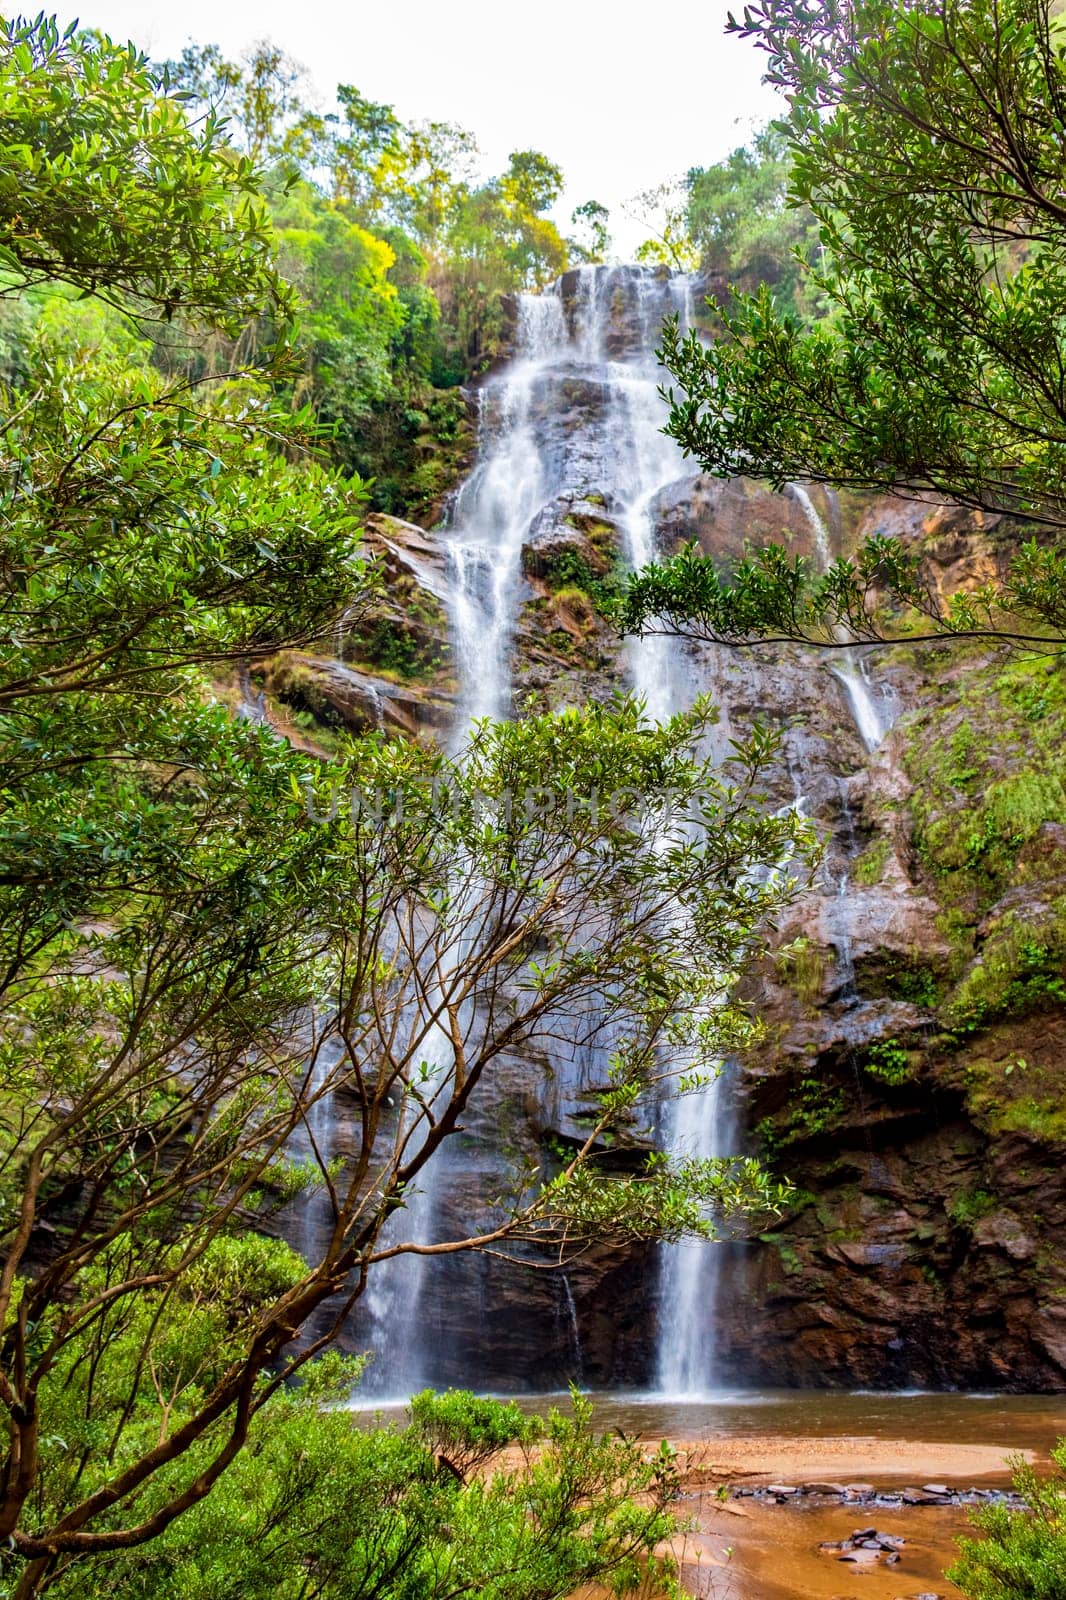 Waterfall seen through the vegetation of the dense tropical forest in Minas Gerais, Brazil